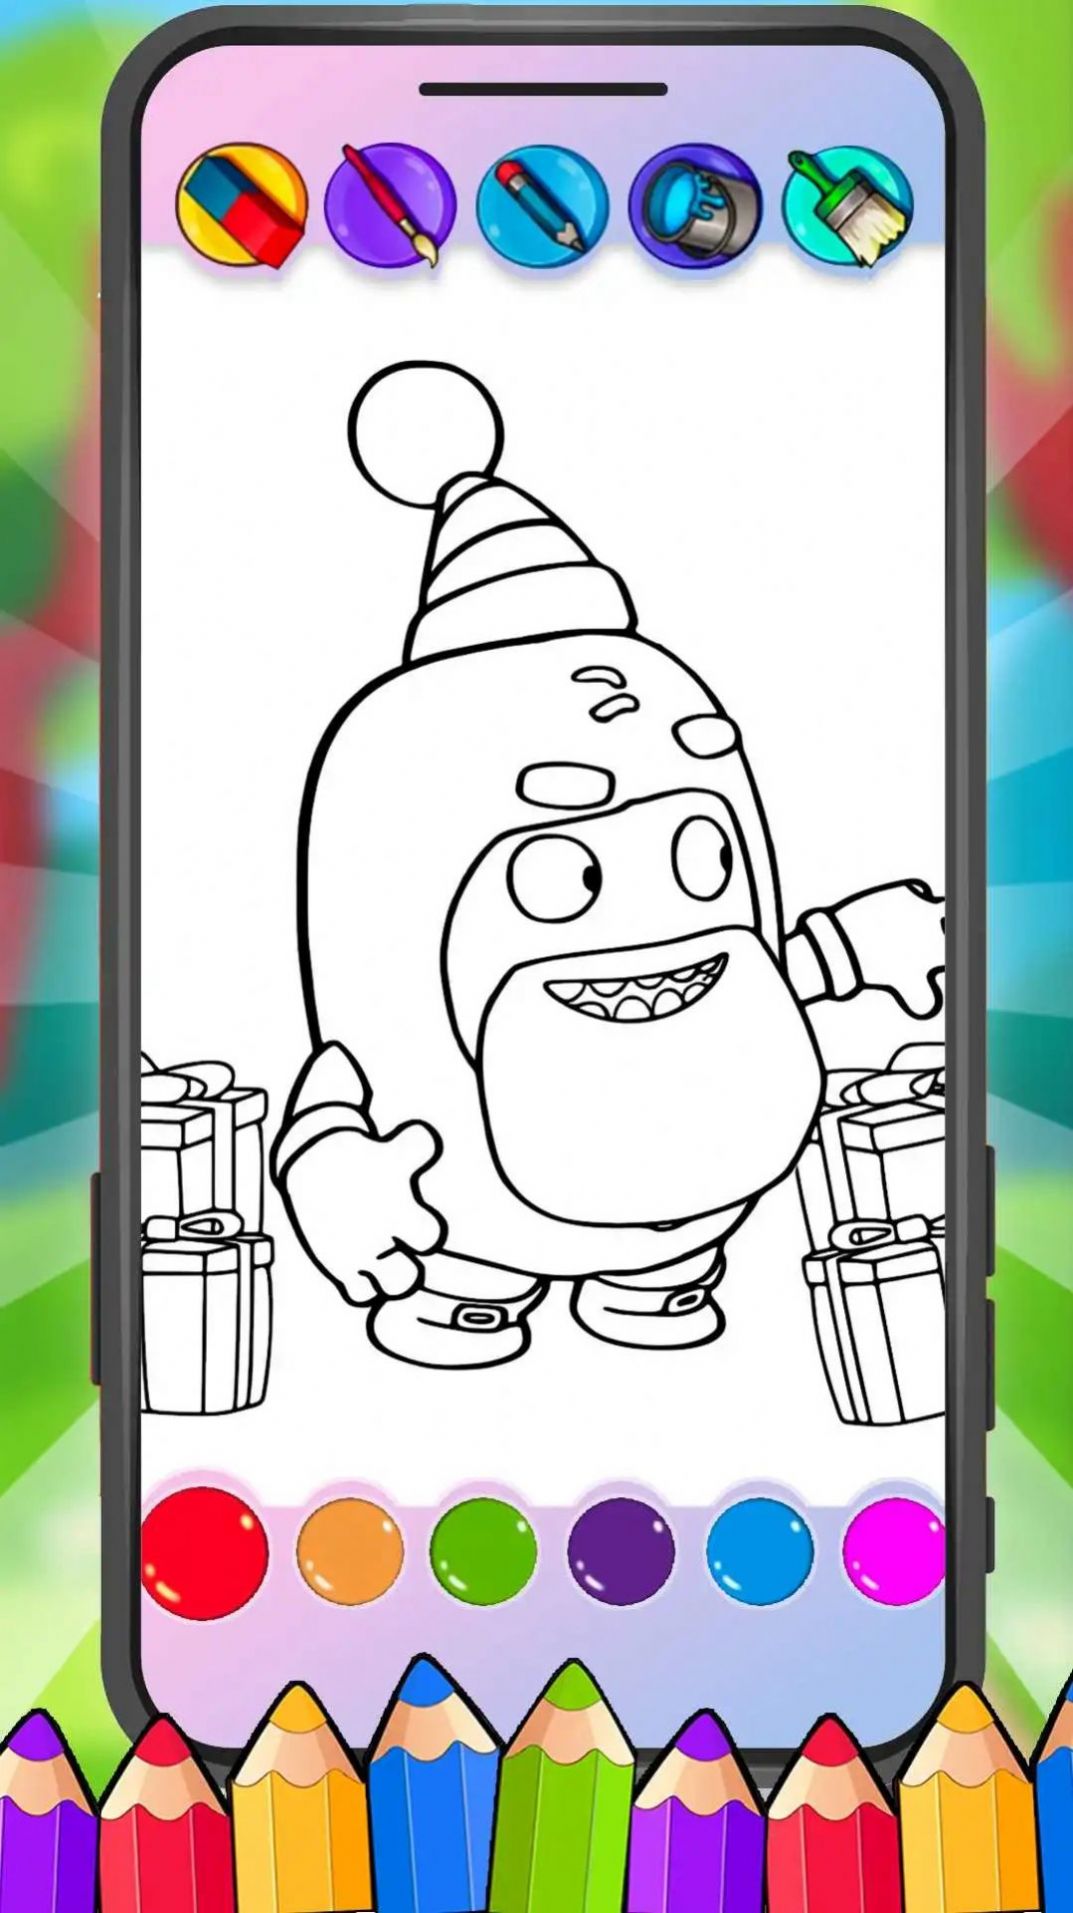  Oddbods Coloring Game